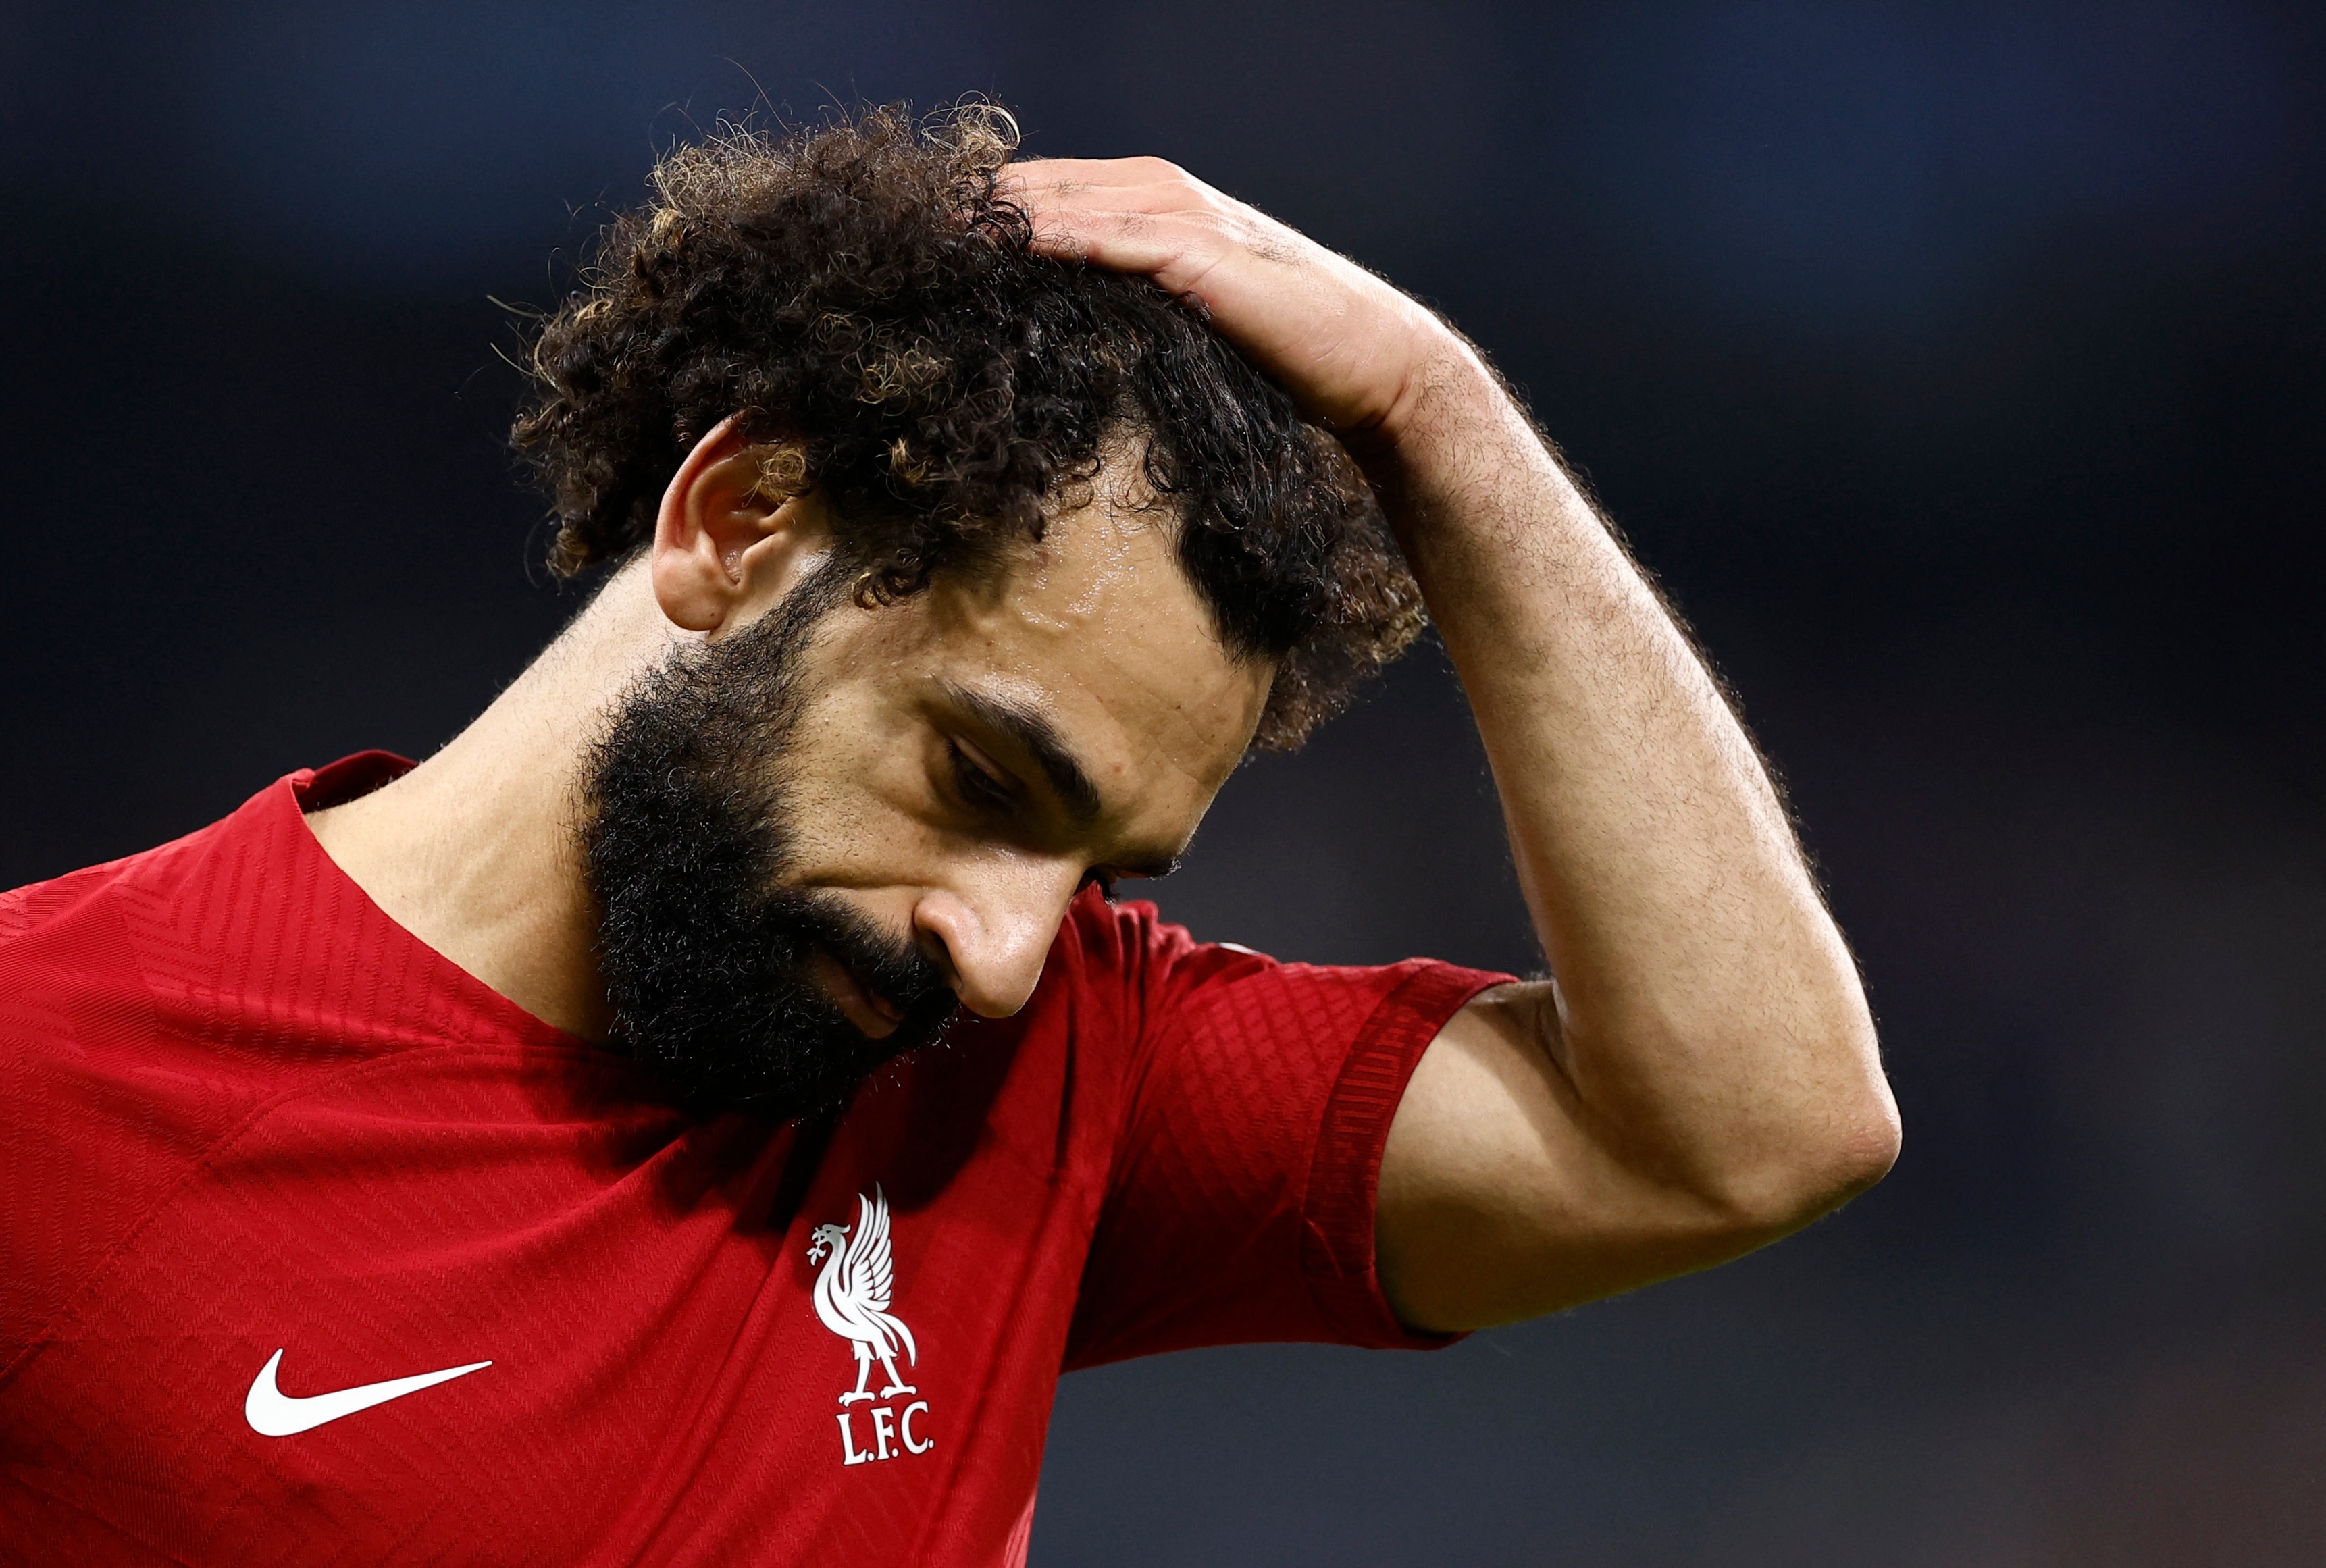 Mohamed Salah bid farewell to the Champions League against Real Madrid giants